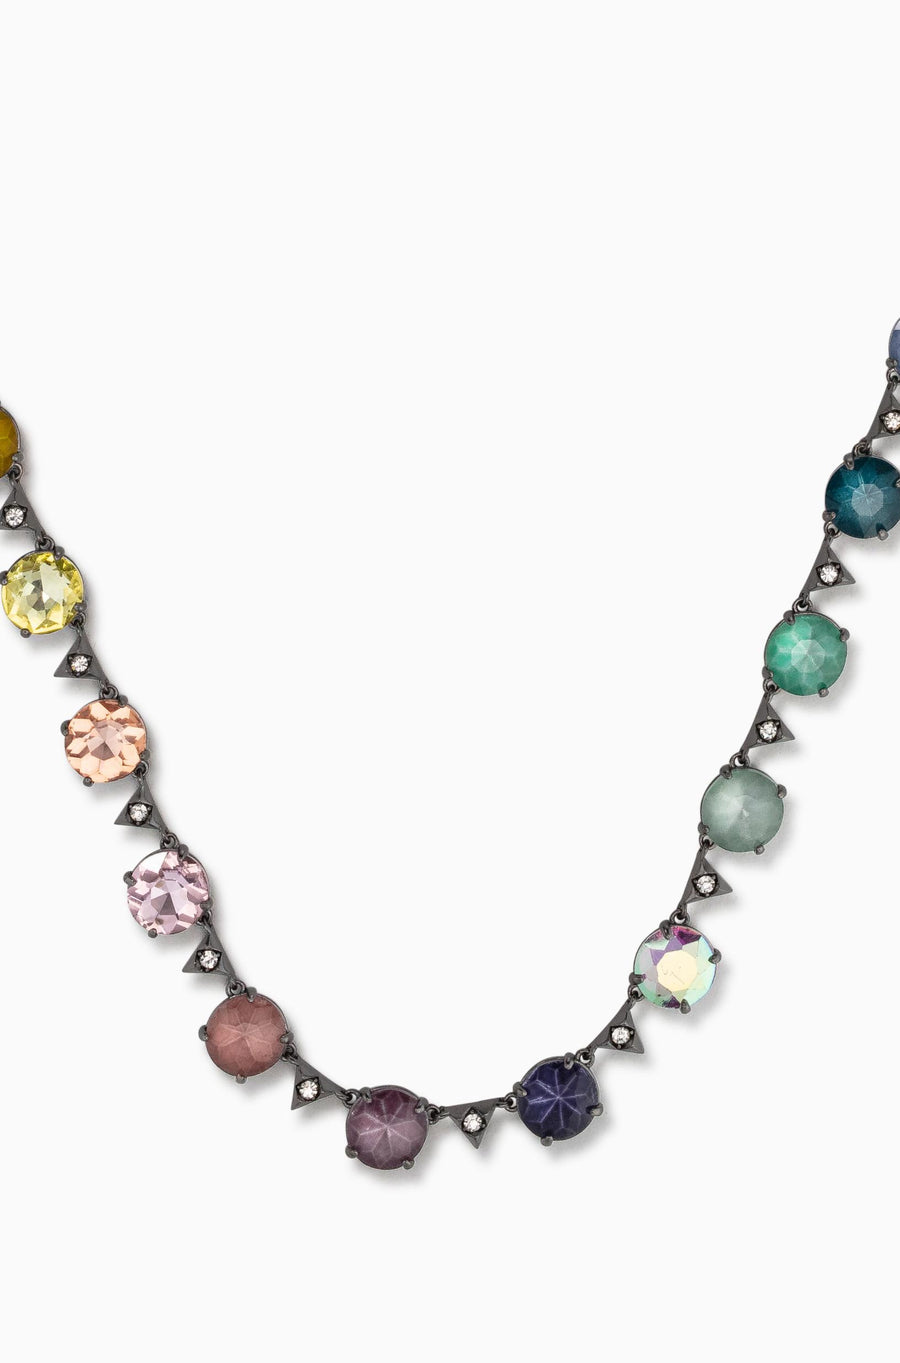 Confections Crystal Necklace - Stella & Dot